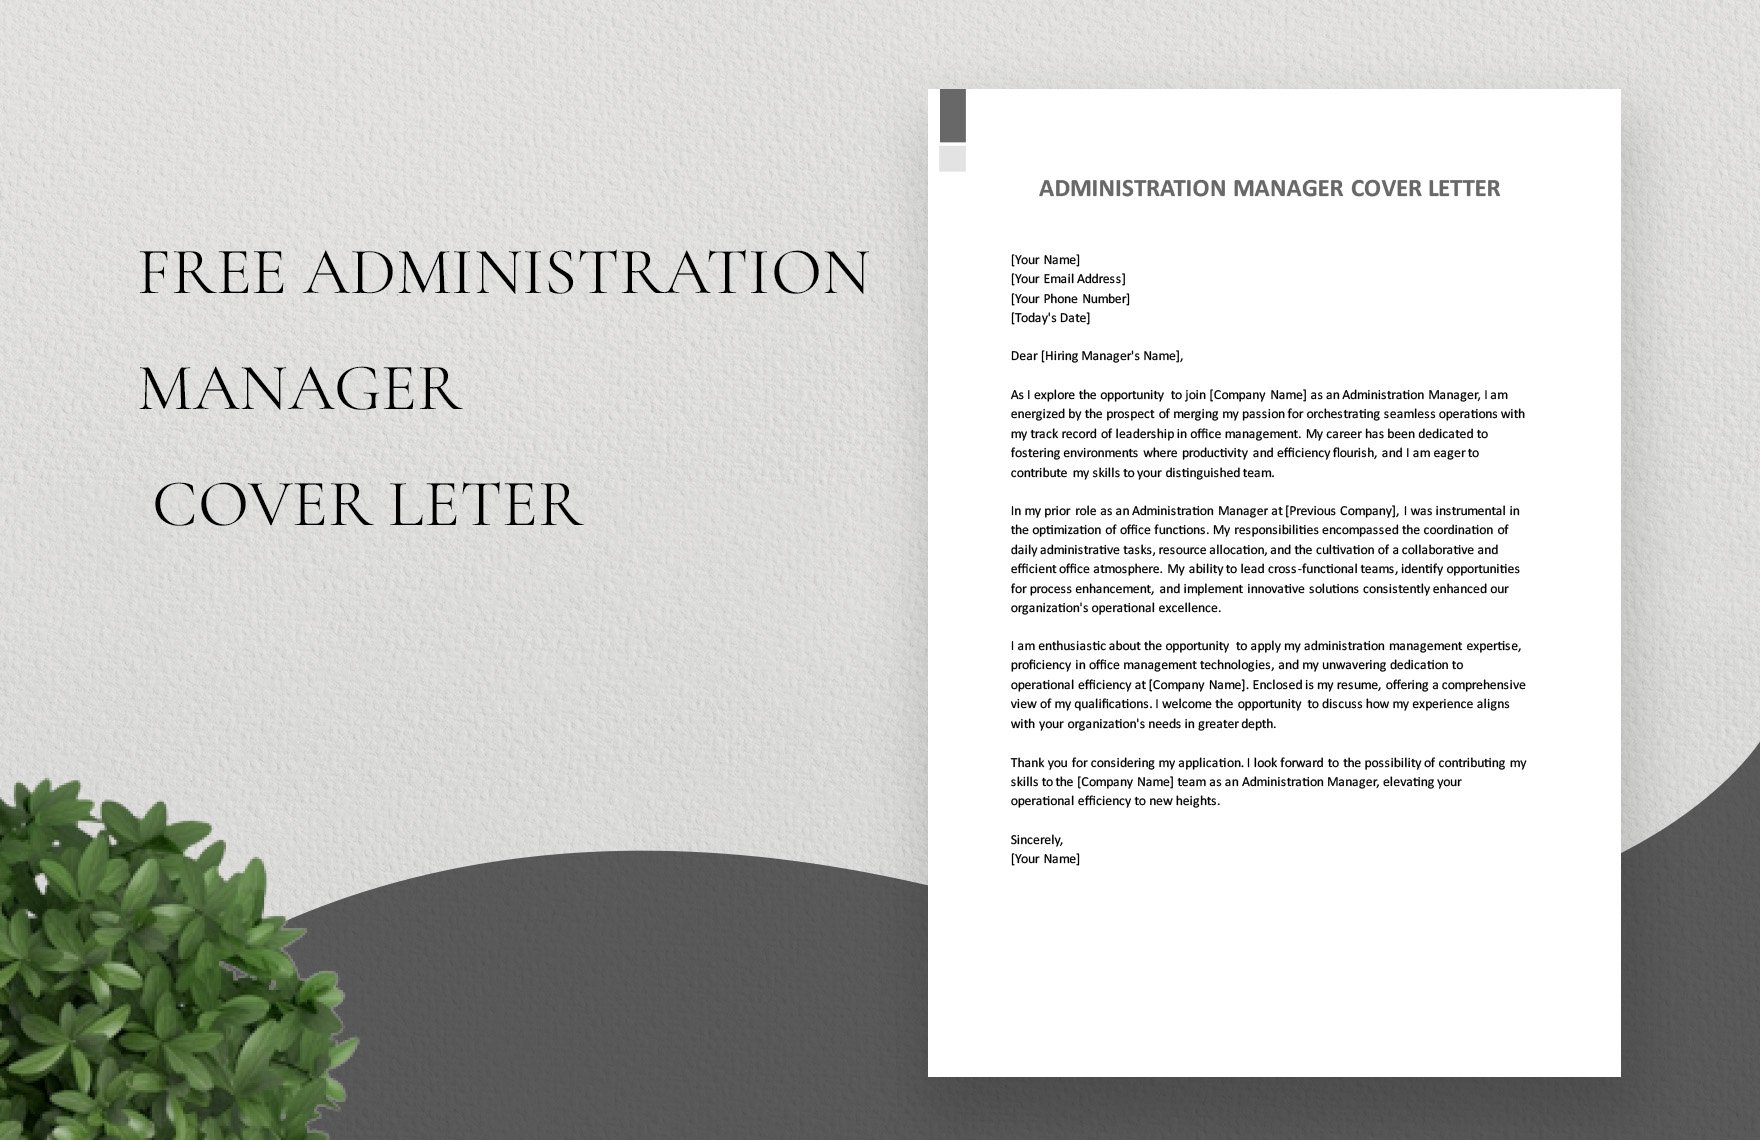 Administration Manager Cover Letter